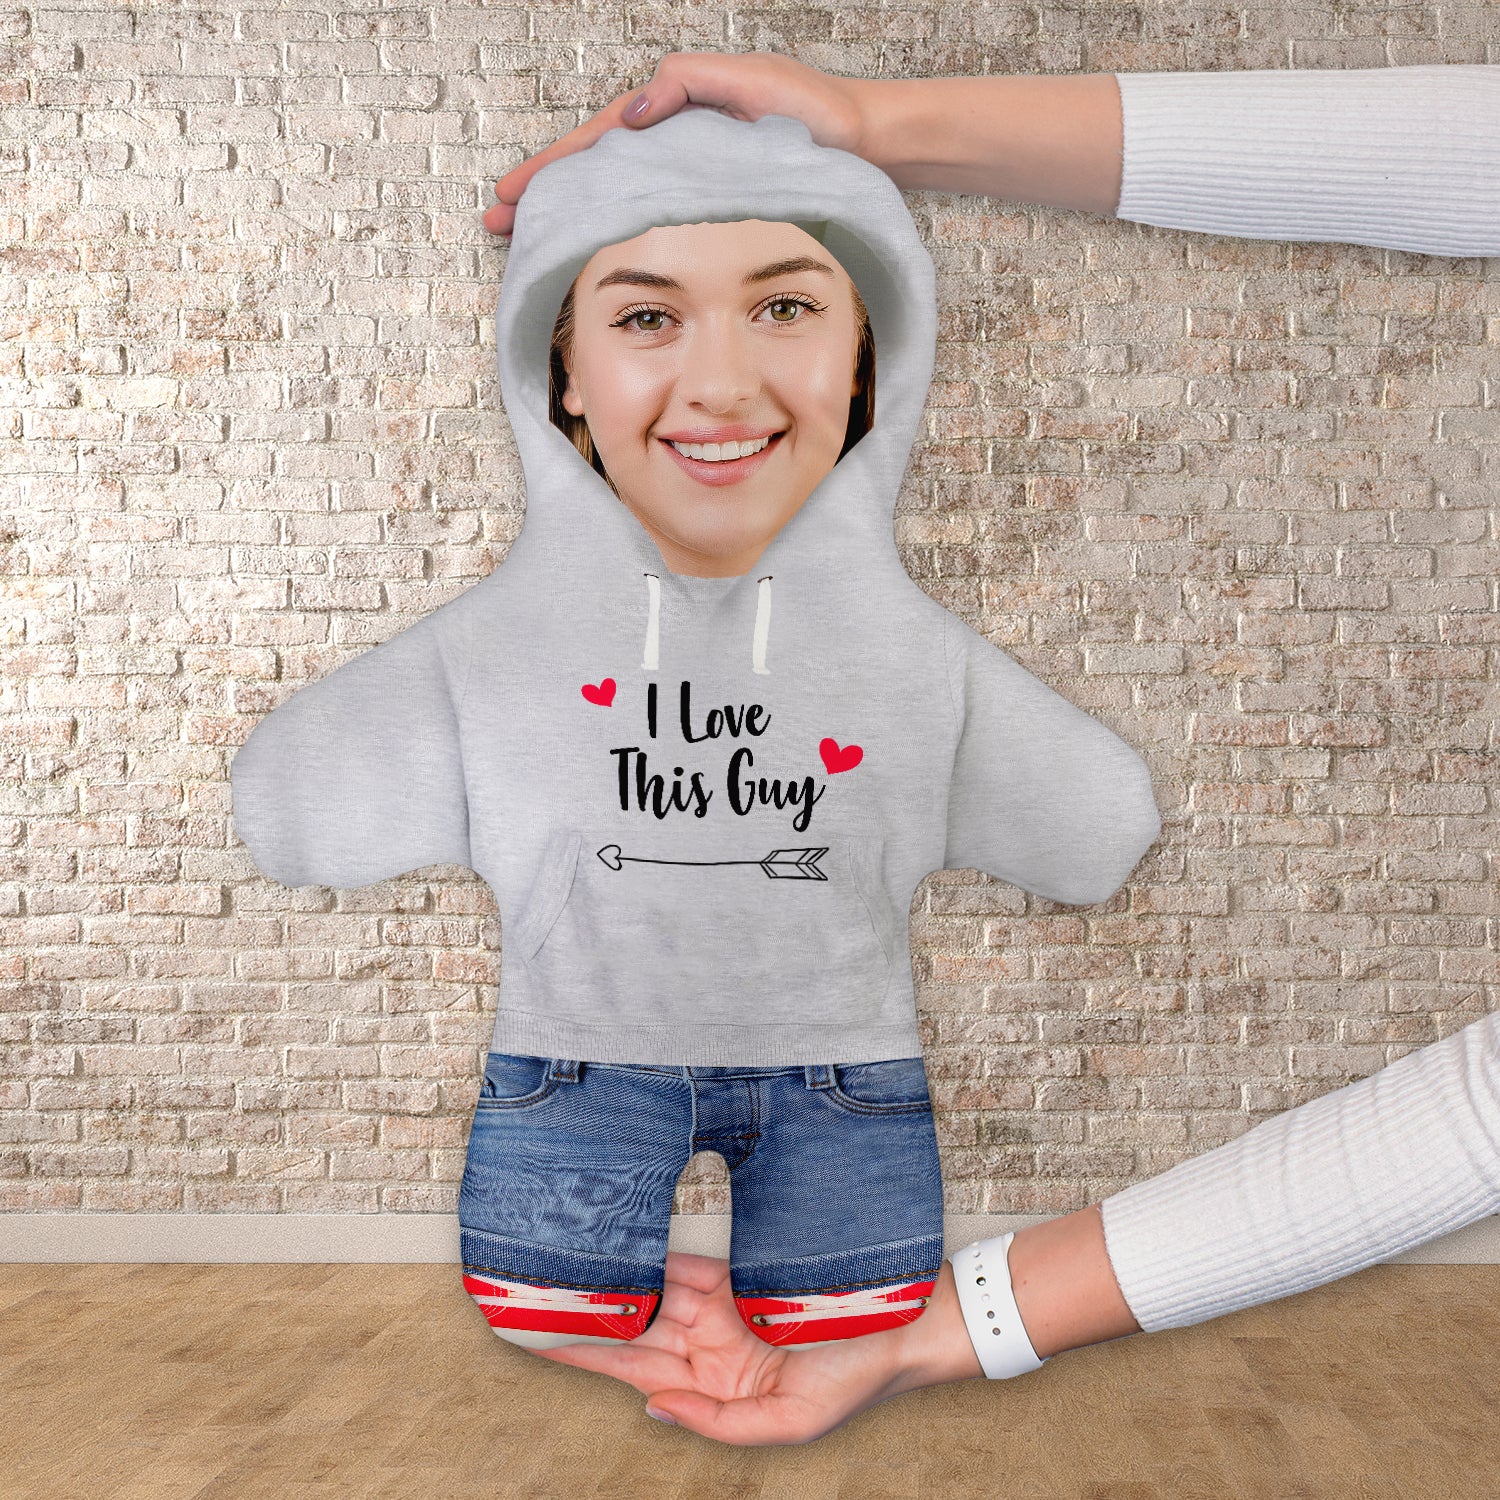 I love this girl or guy hoodie - Personalised Mini Me Doll - Two Variants